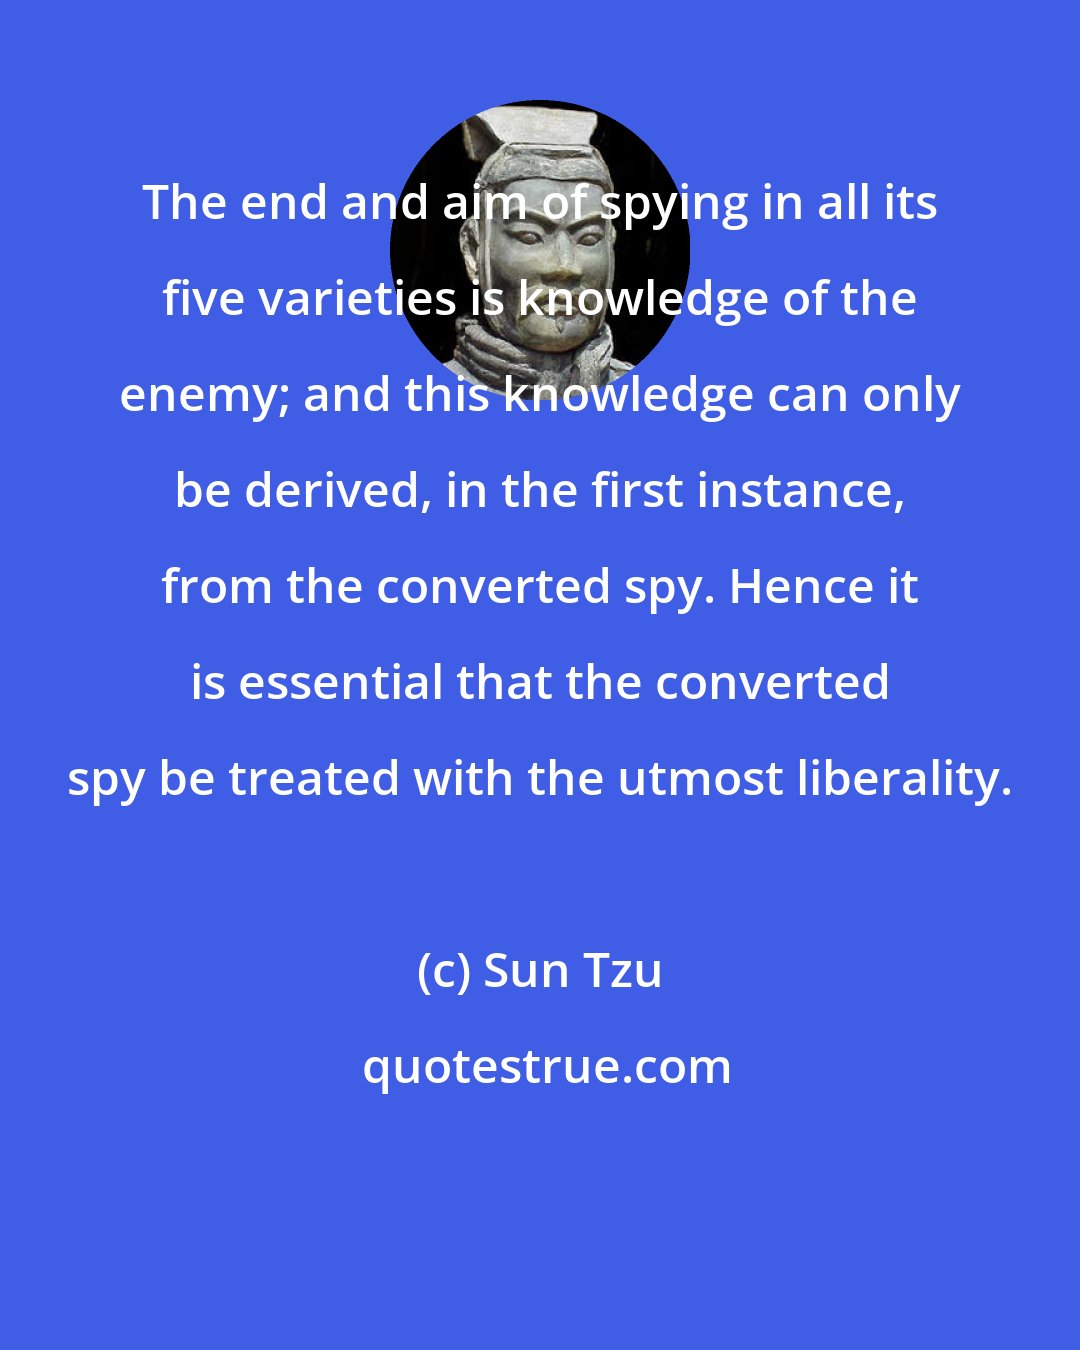 Sun Tzu: The end and aim of spying in all its five varieties is knowledge of the enemy; and this knowledge can only be derived, in the first instance, from the converted spy. Hence it is essential that the converted spy be treated with the utmost liberality.